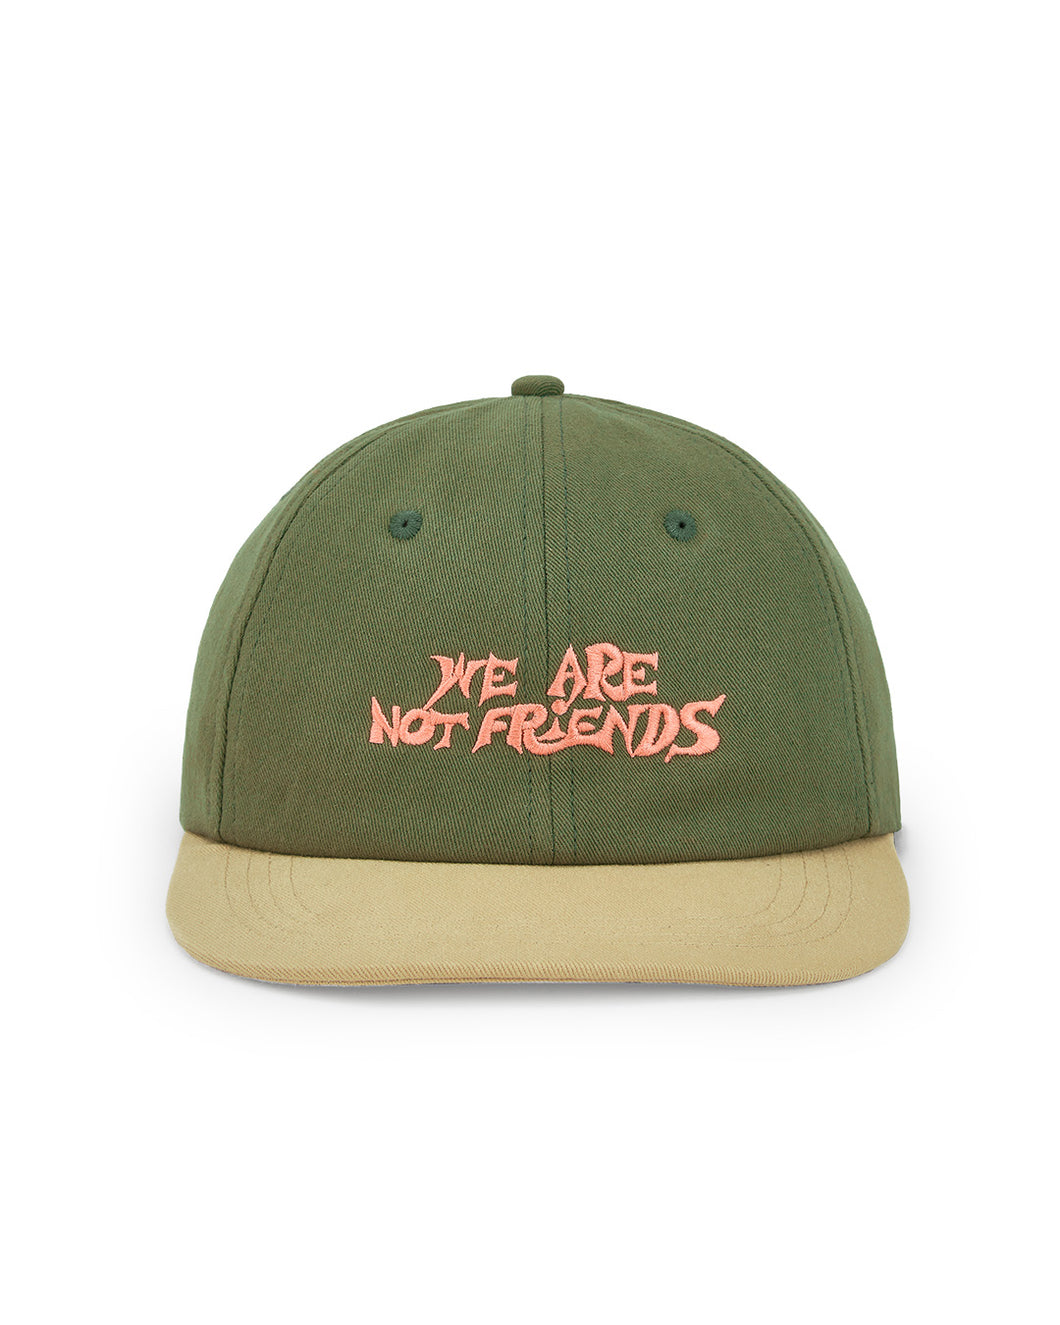 WE ARE NOT FRIENDS FREESTYLE TYPO GREEN